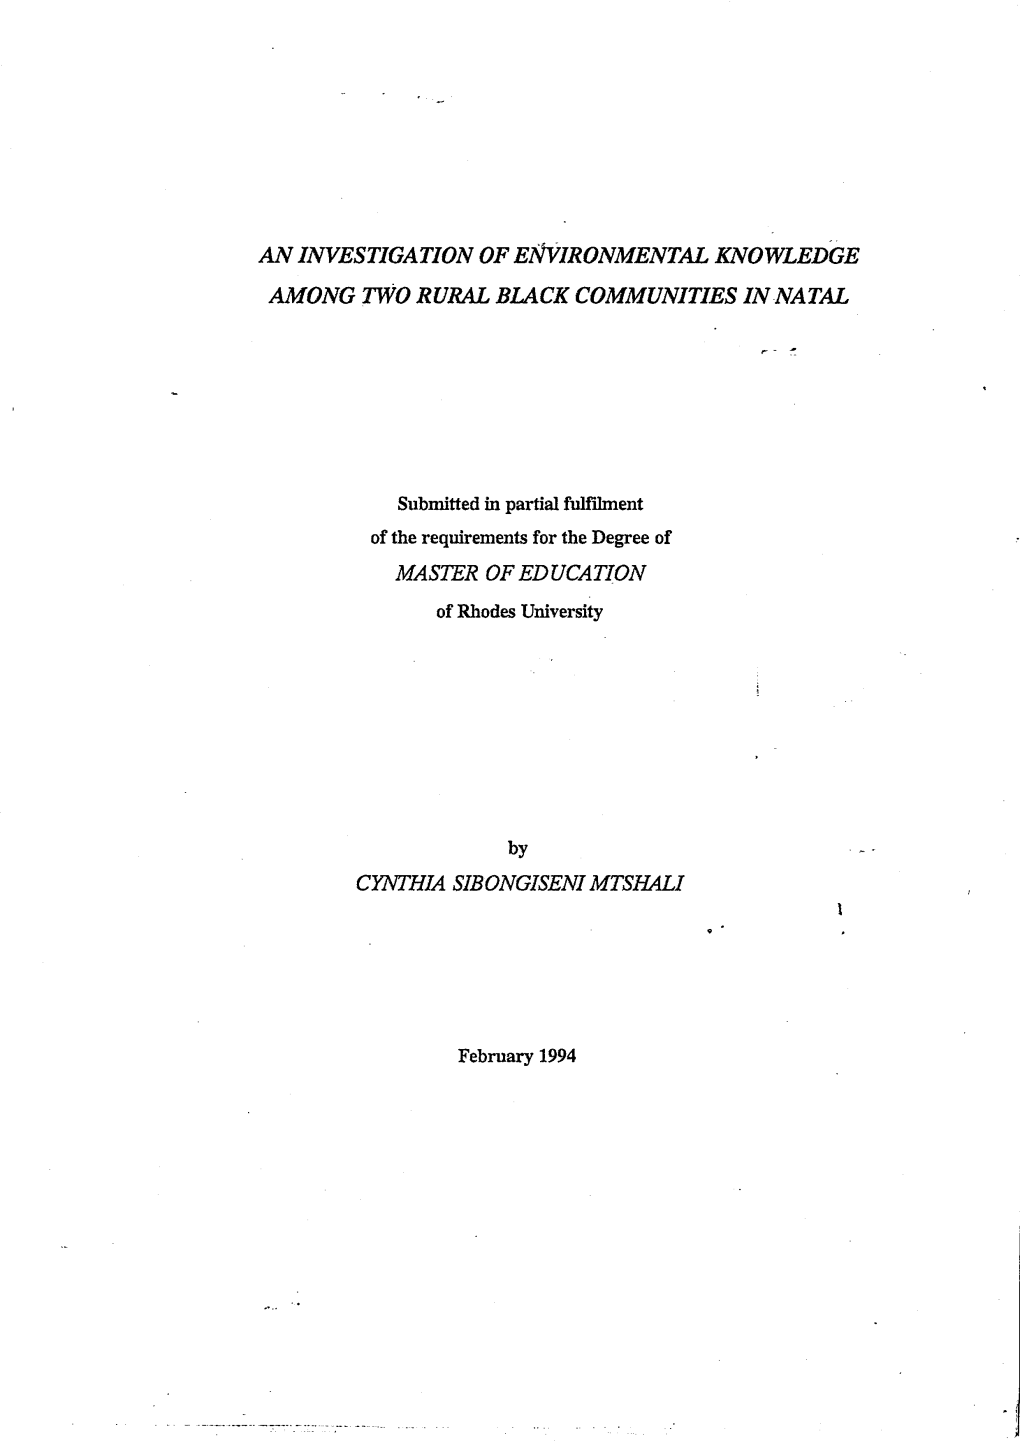 An Investigation of Environmental Knowledge Among Two Rural Black Communities in Natal